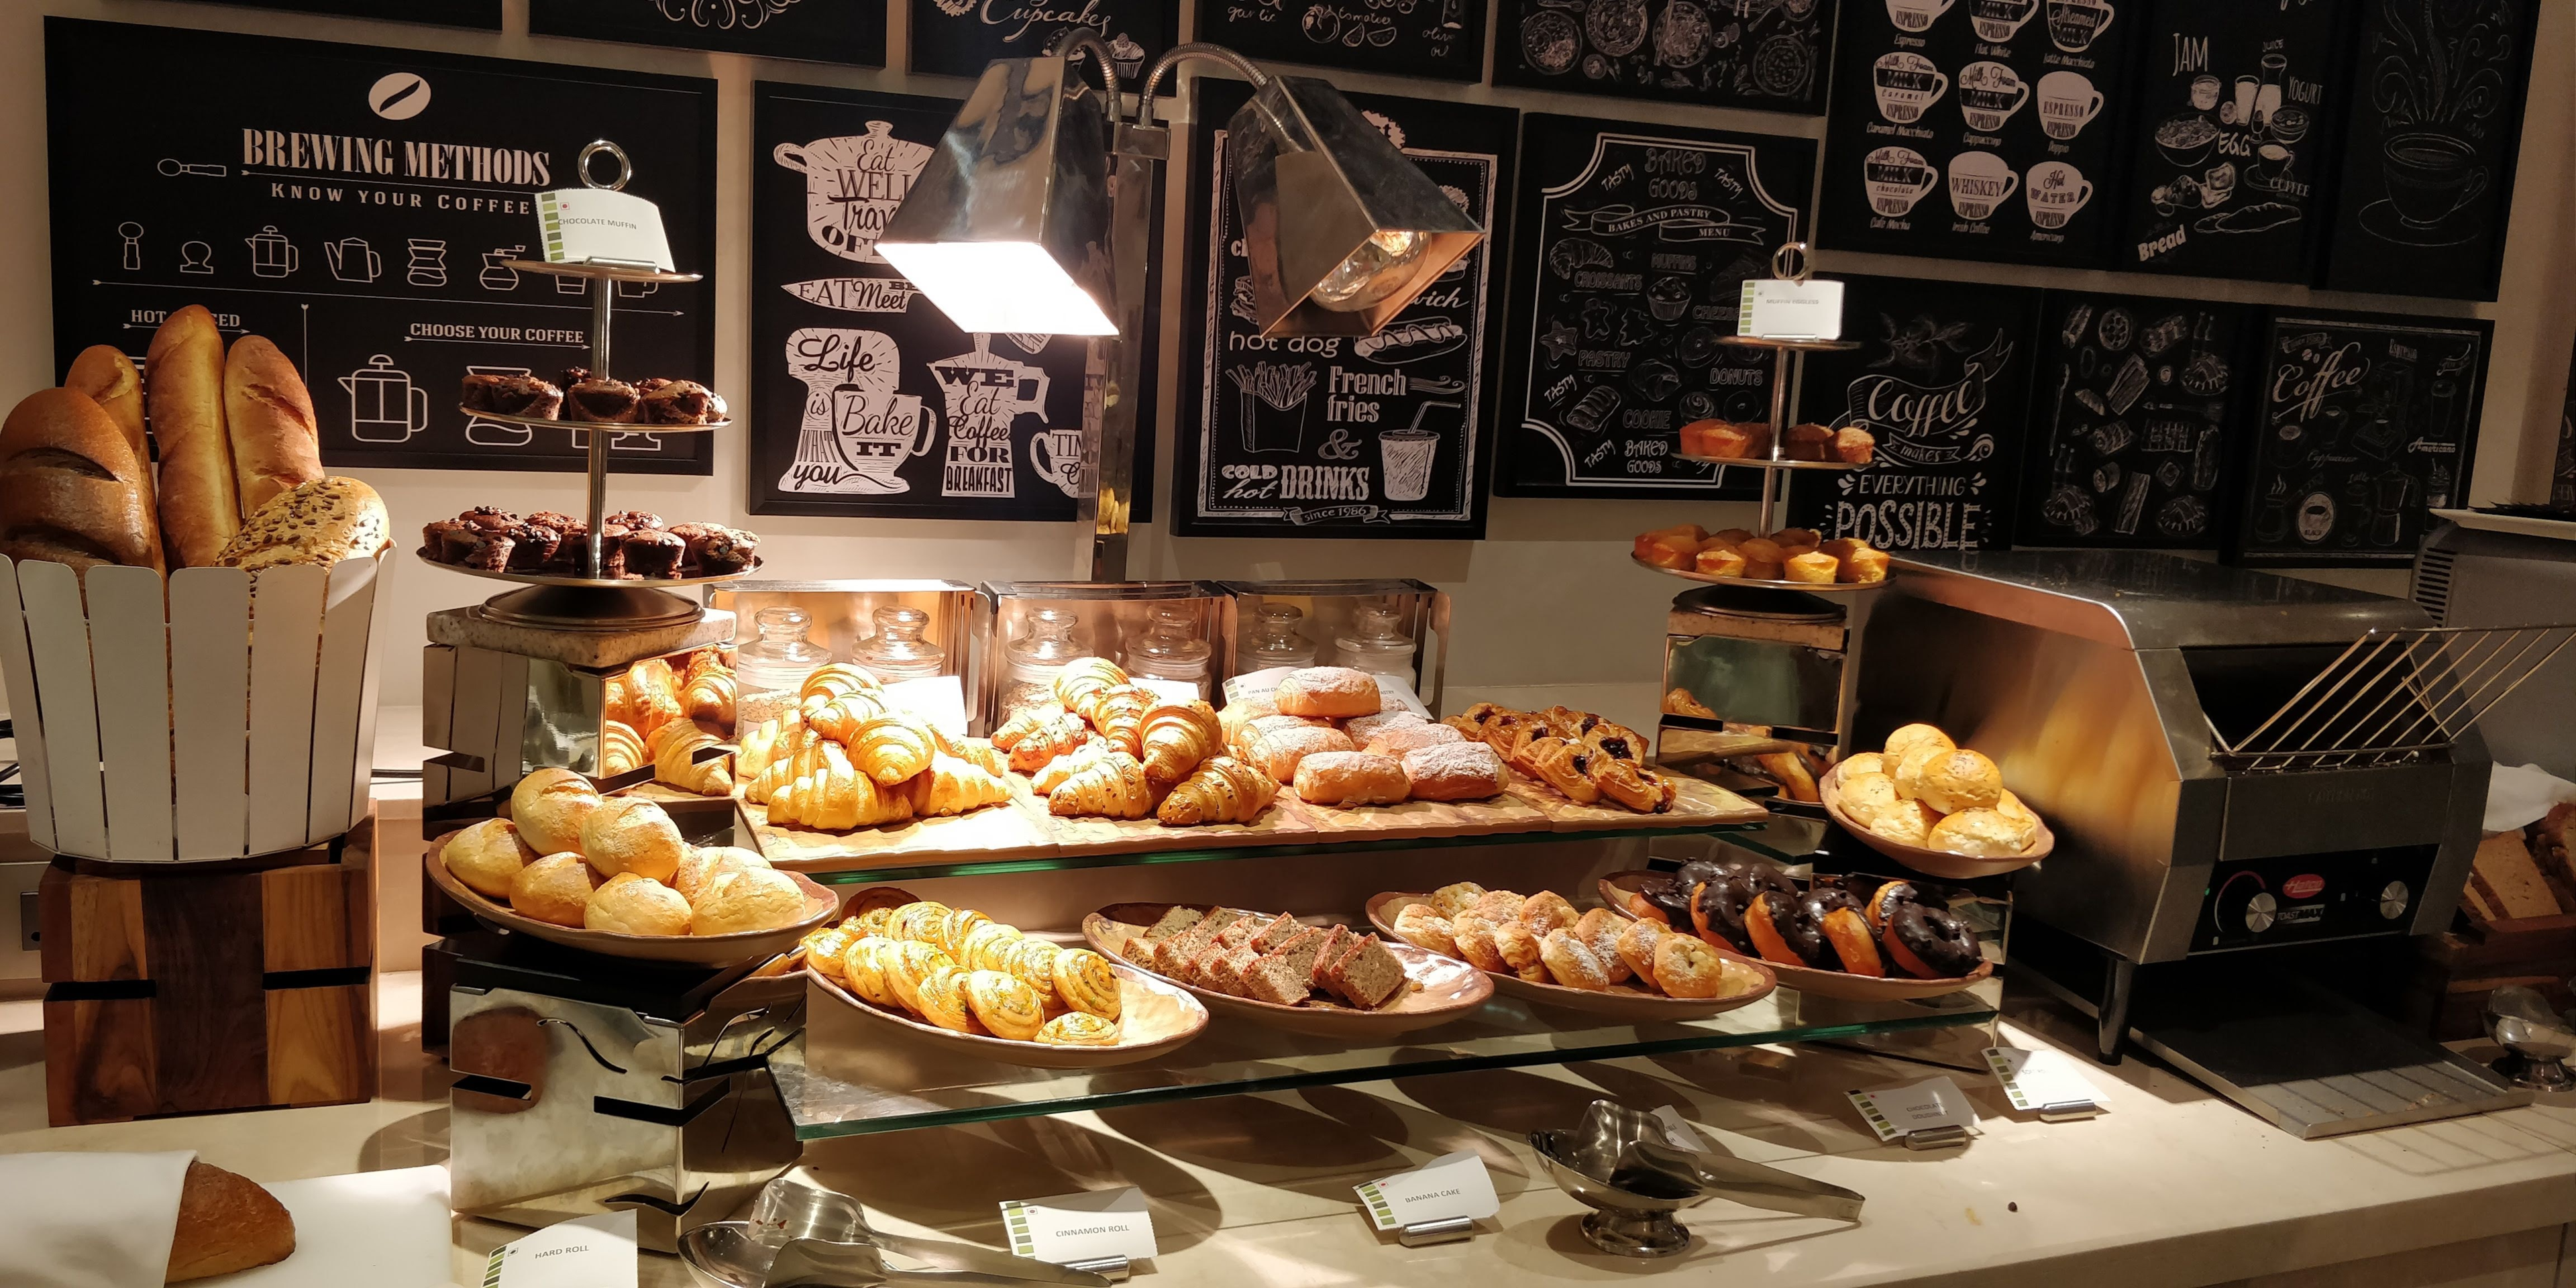 Image of counter with breads and pastries